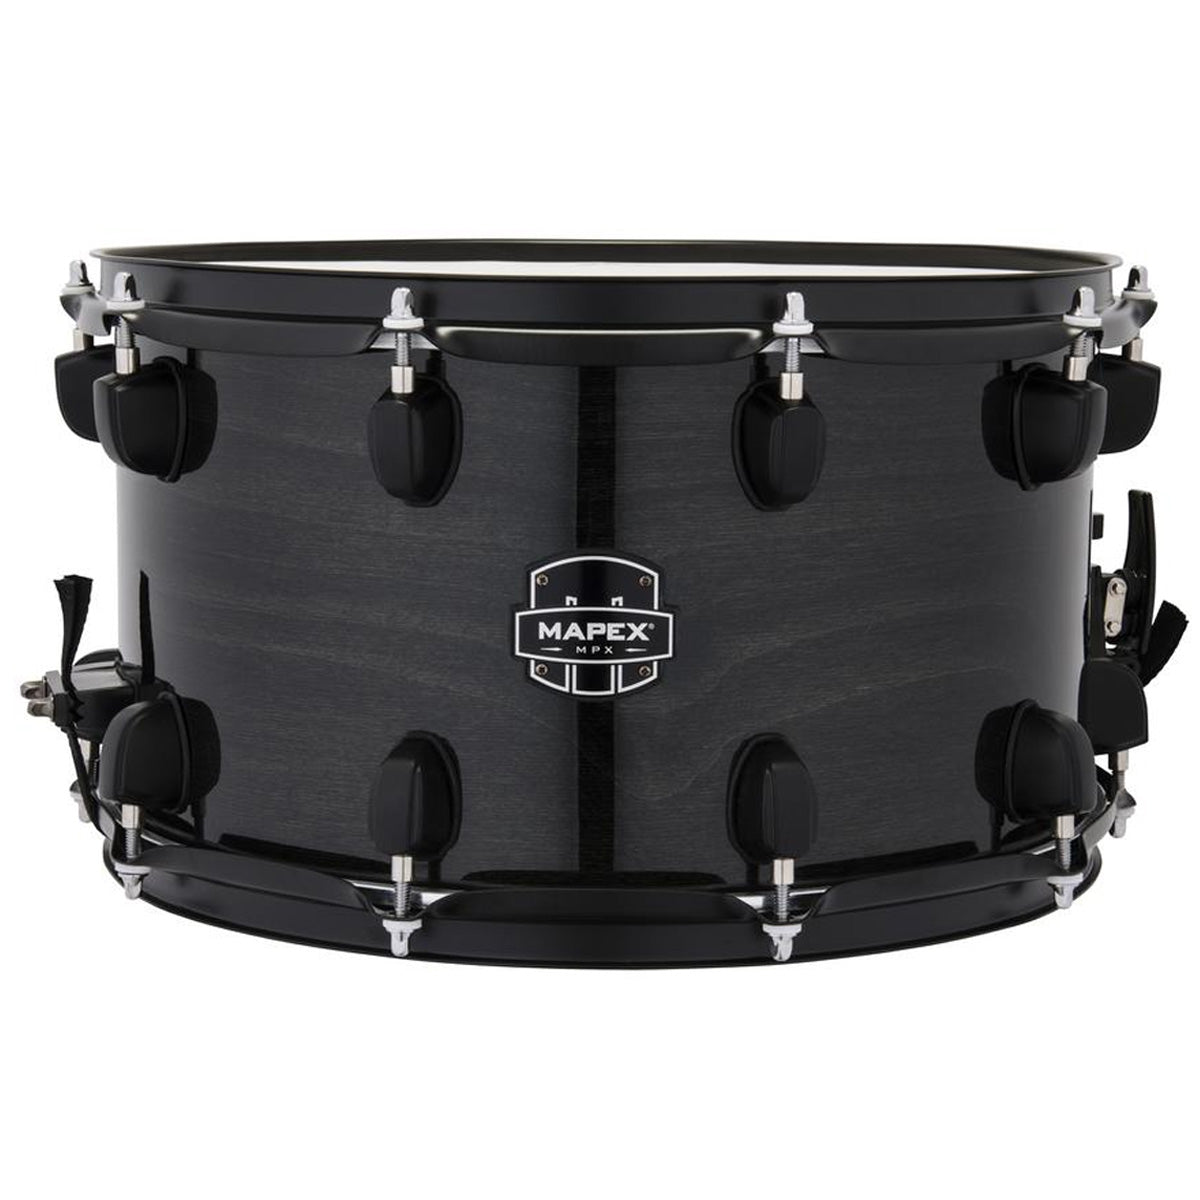 Mapex MPX 14"x8" Hybrid Shell Snare Drum in Black